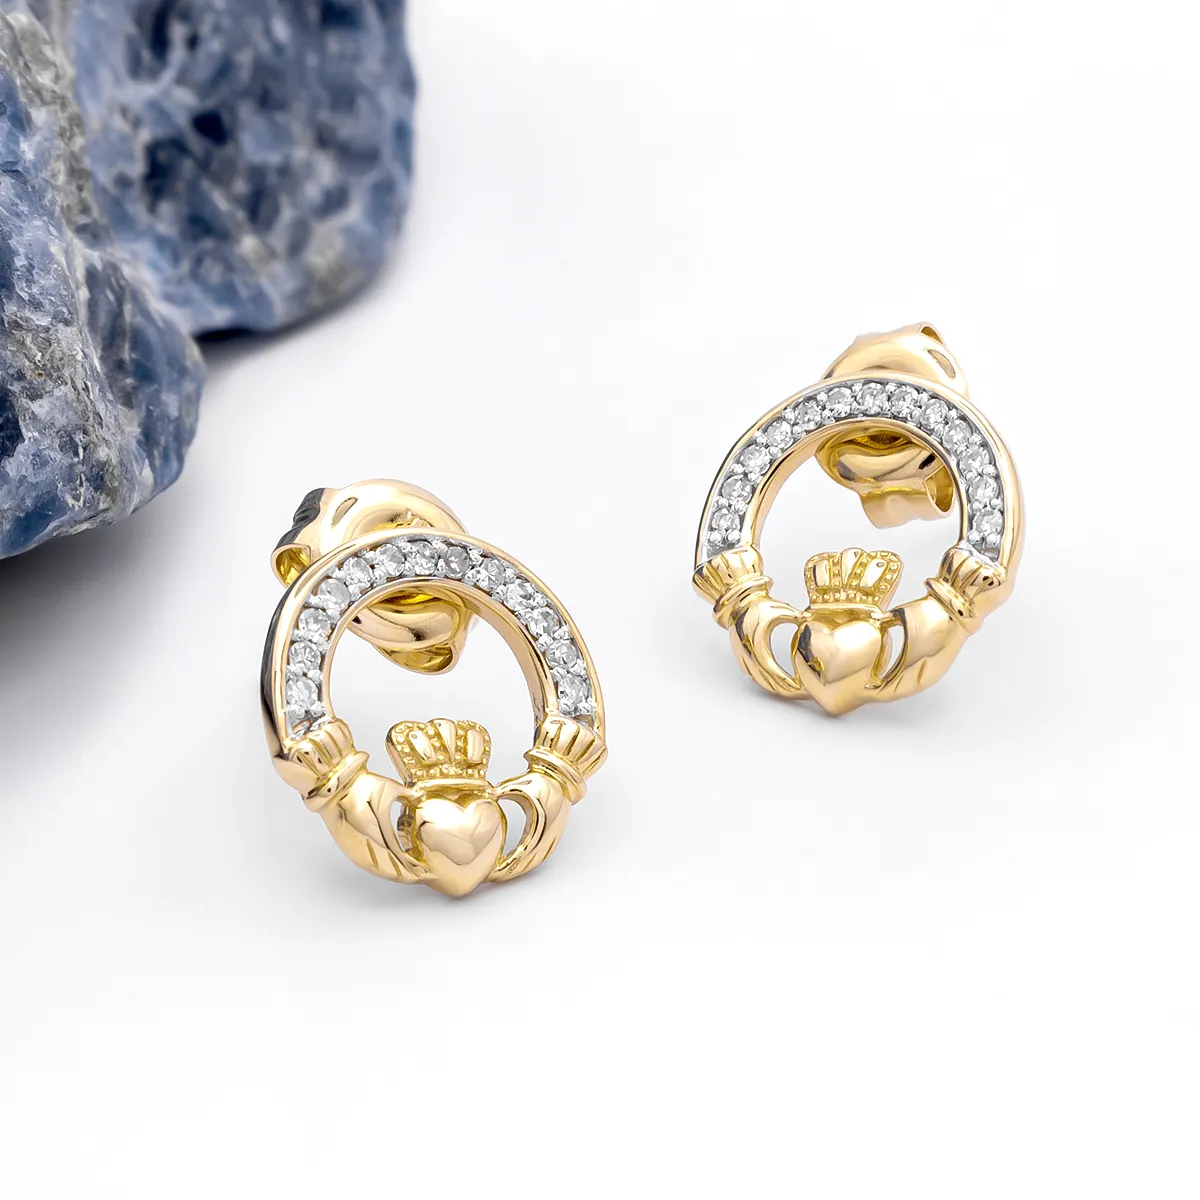 Traditional Claddagh Design Diamond Earrings Set in 14k Gold...